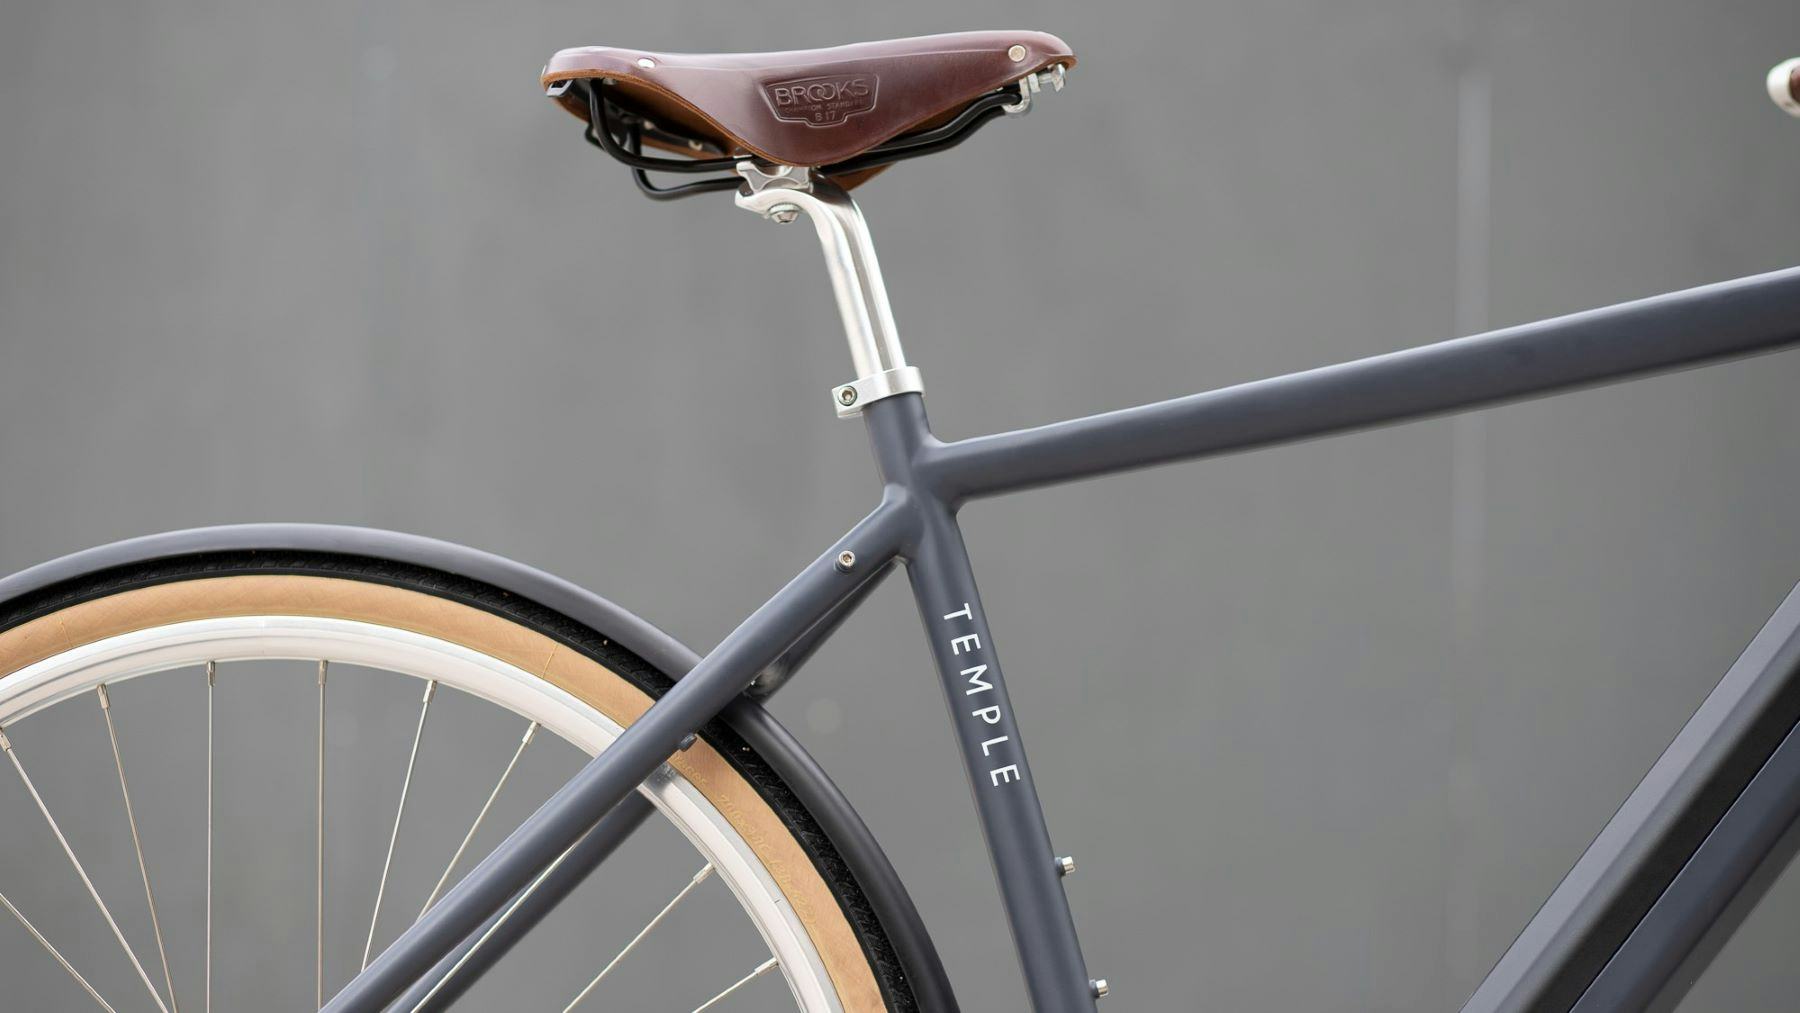 Temple entered the e-bike market last year with its Temple electric brand. – Photo Temple Cycles